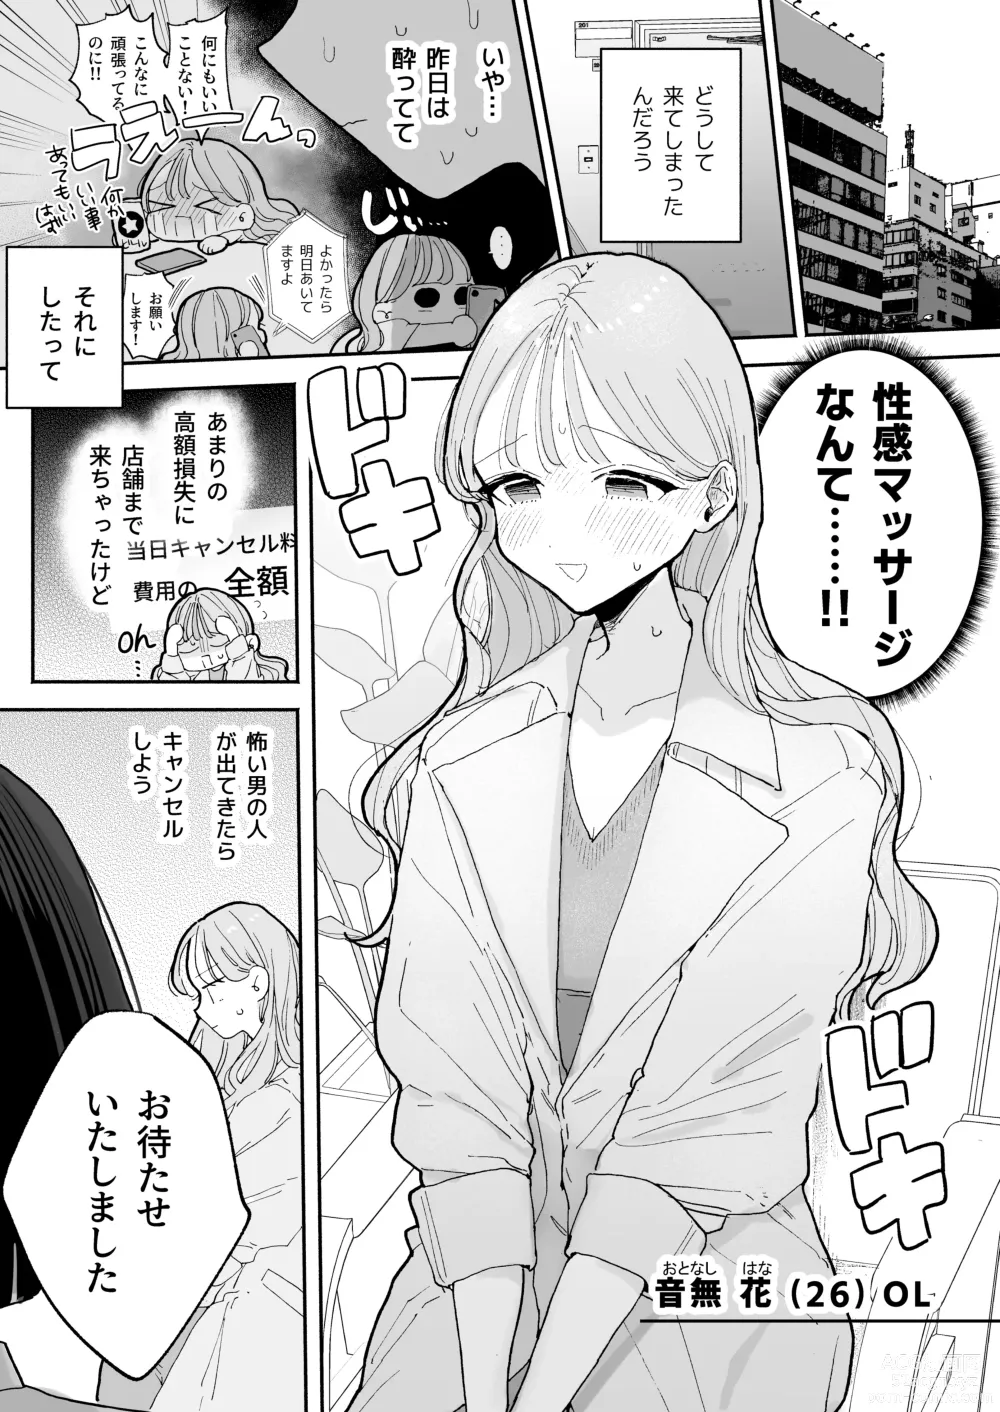 Page 3 of doujinshi Climax Reflex A story about a girl who becomes ◯◯ at an erotic massage shop in front of the station